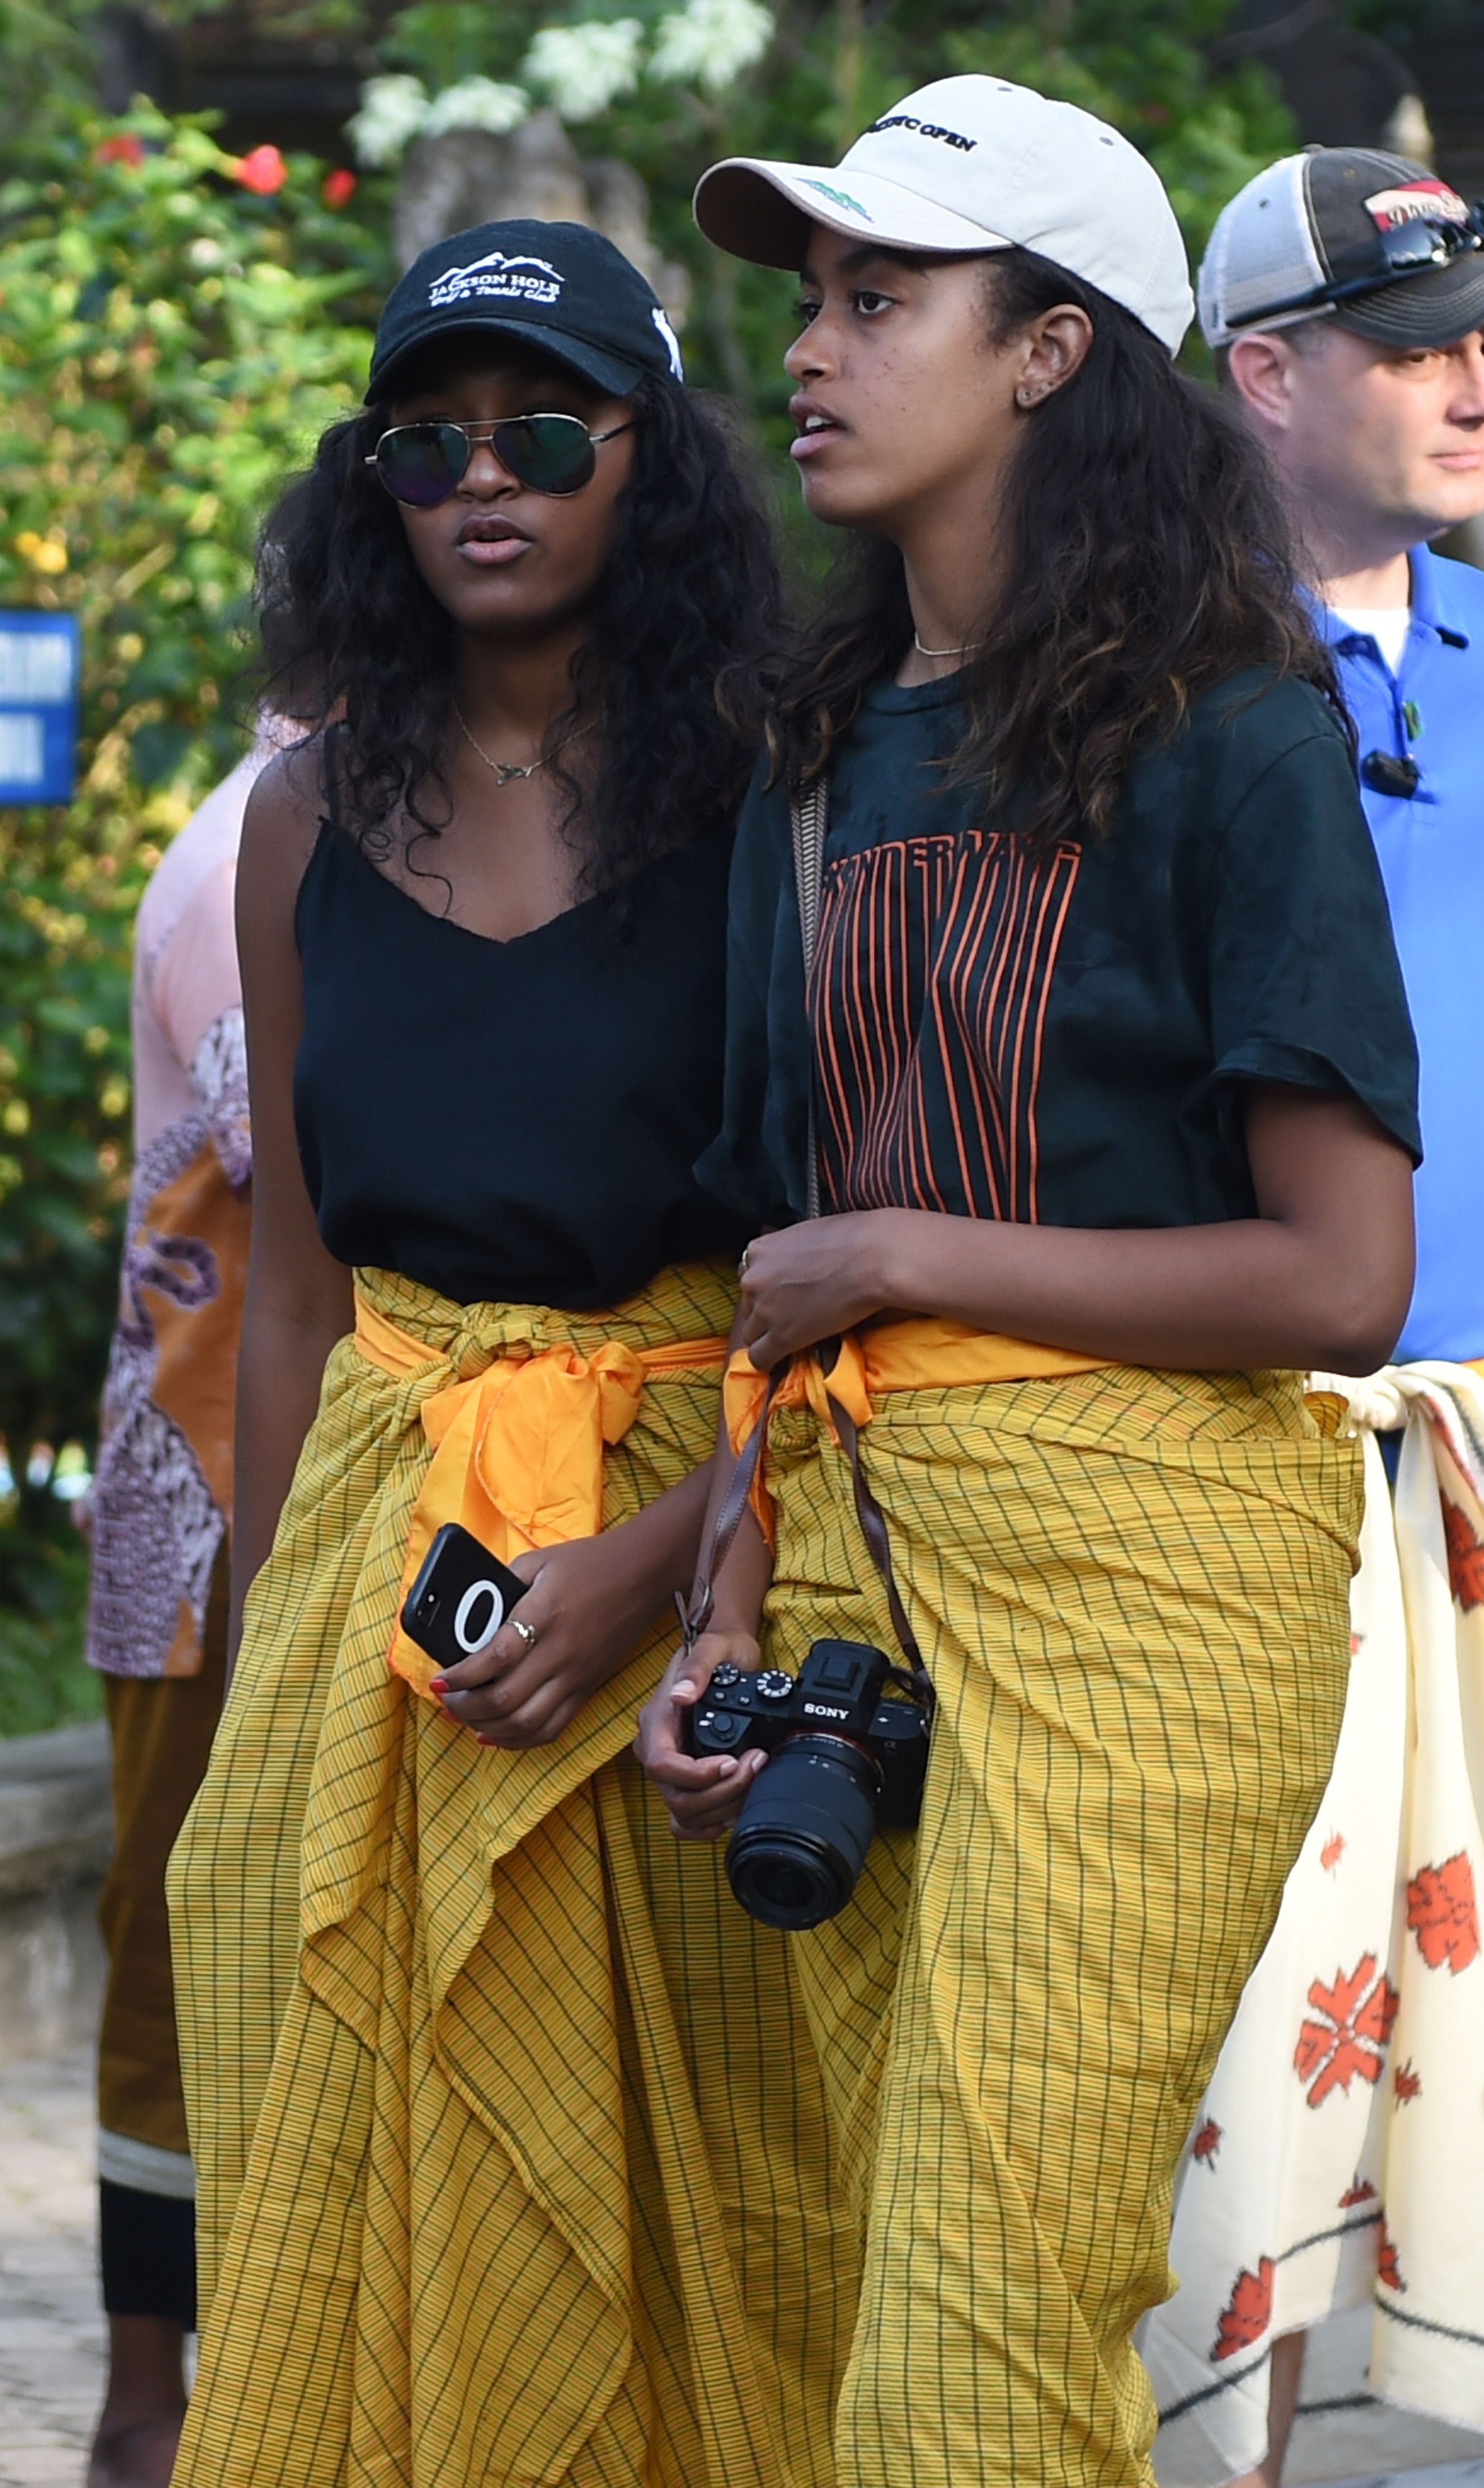 Sasha and Malia, daughters of former US president Barack Obama, visit Tirtha Empul temple at Tampaksiring Village in Gianyar on the Indonesian resort island of Bali on June 27, 2017. | Source: Getty Images